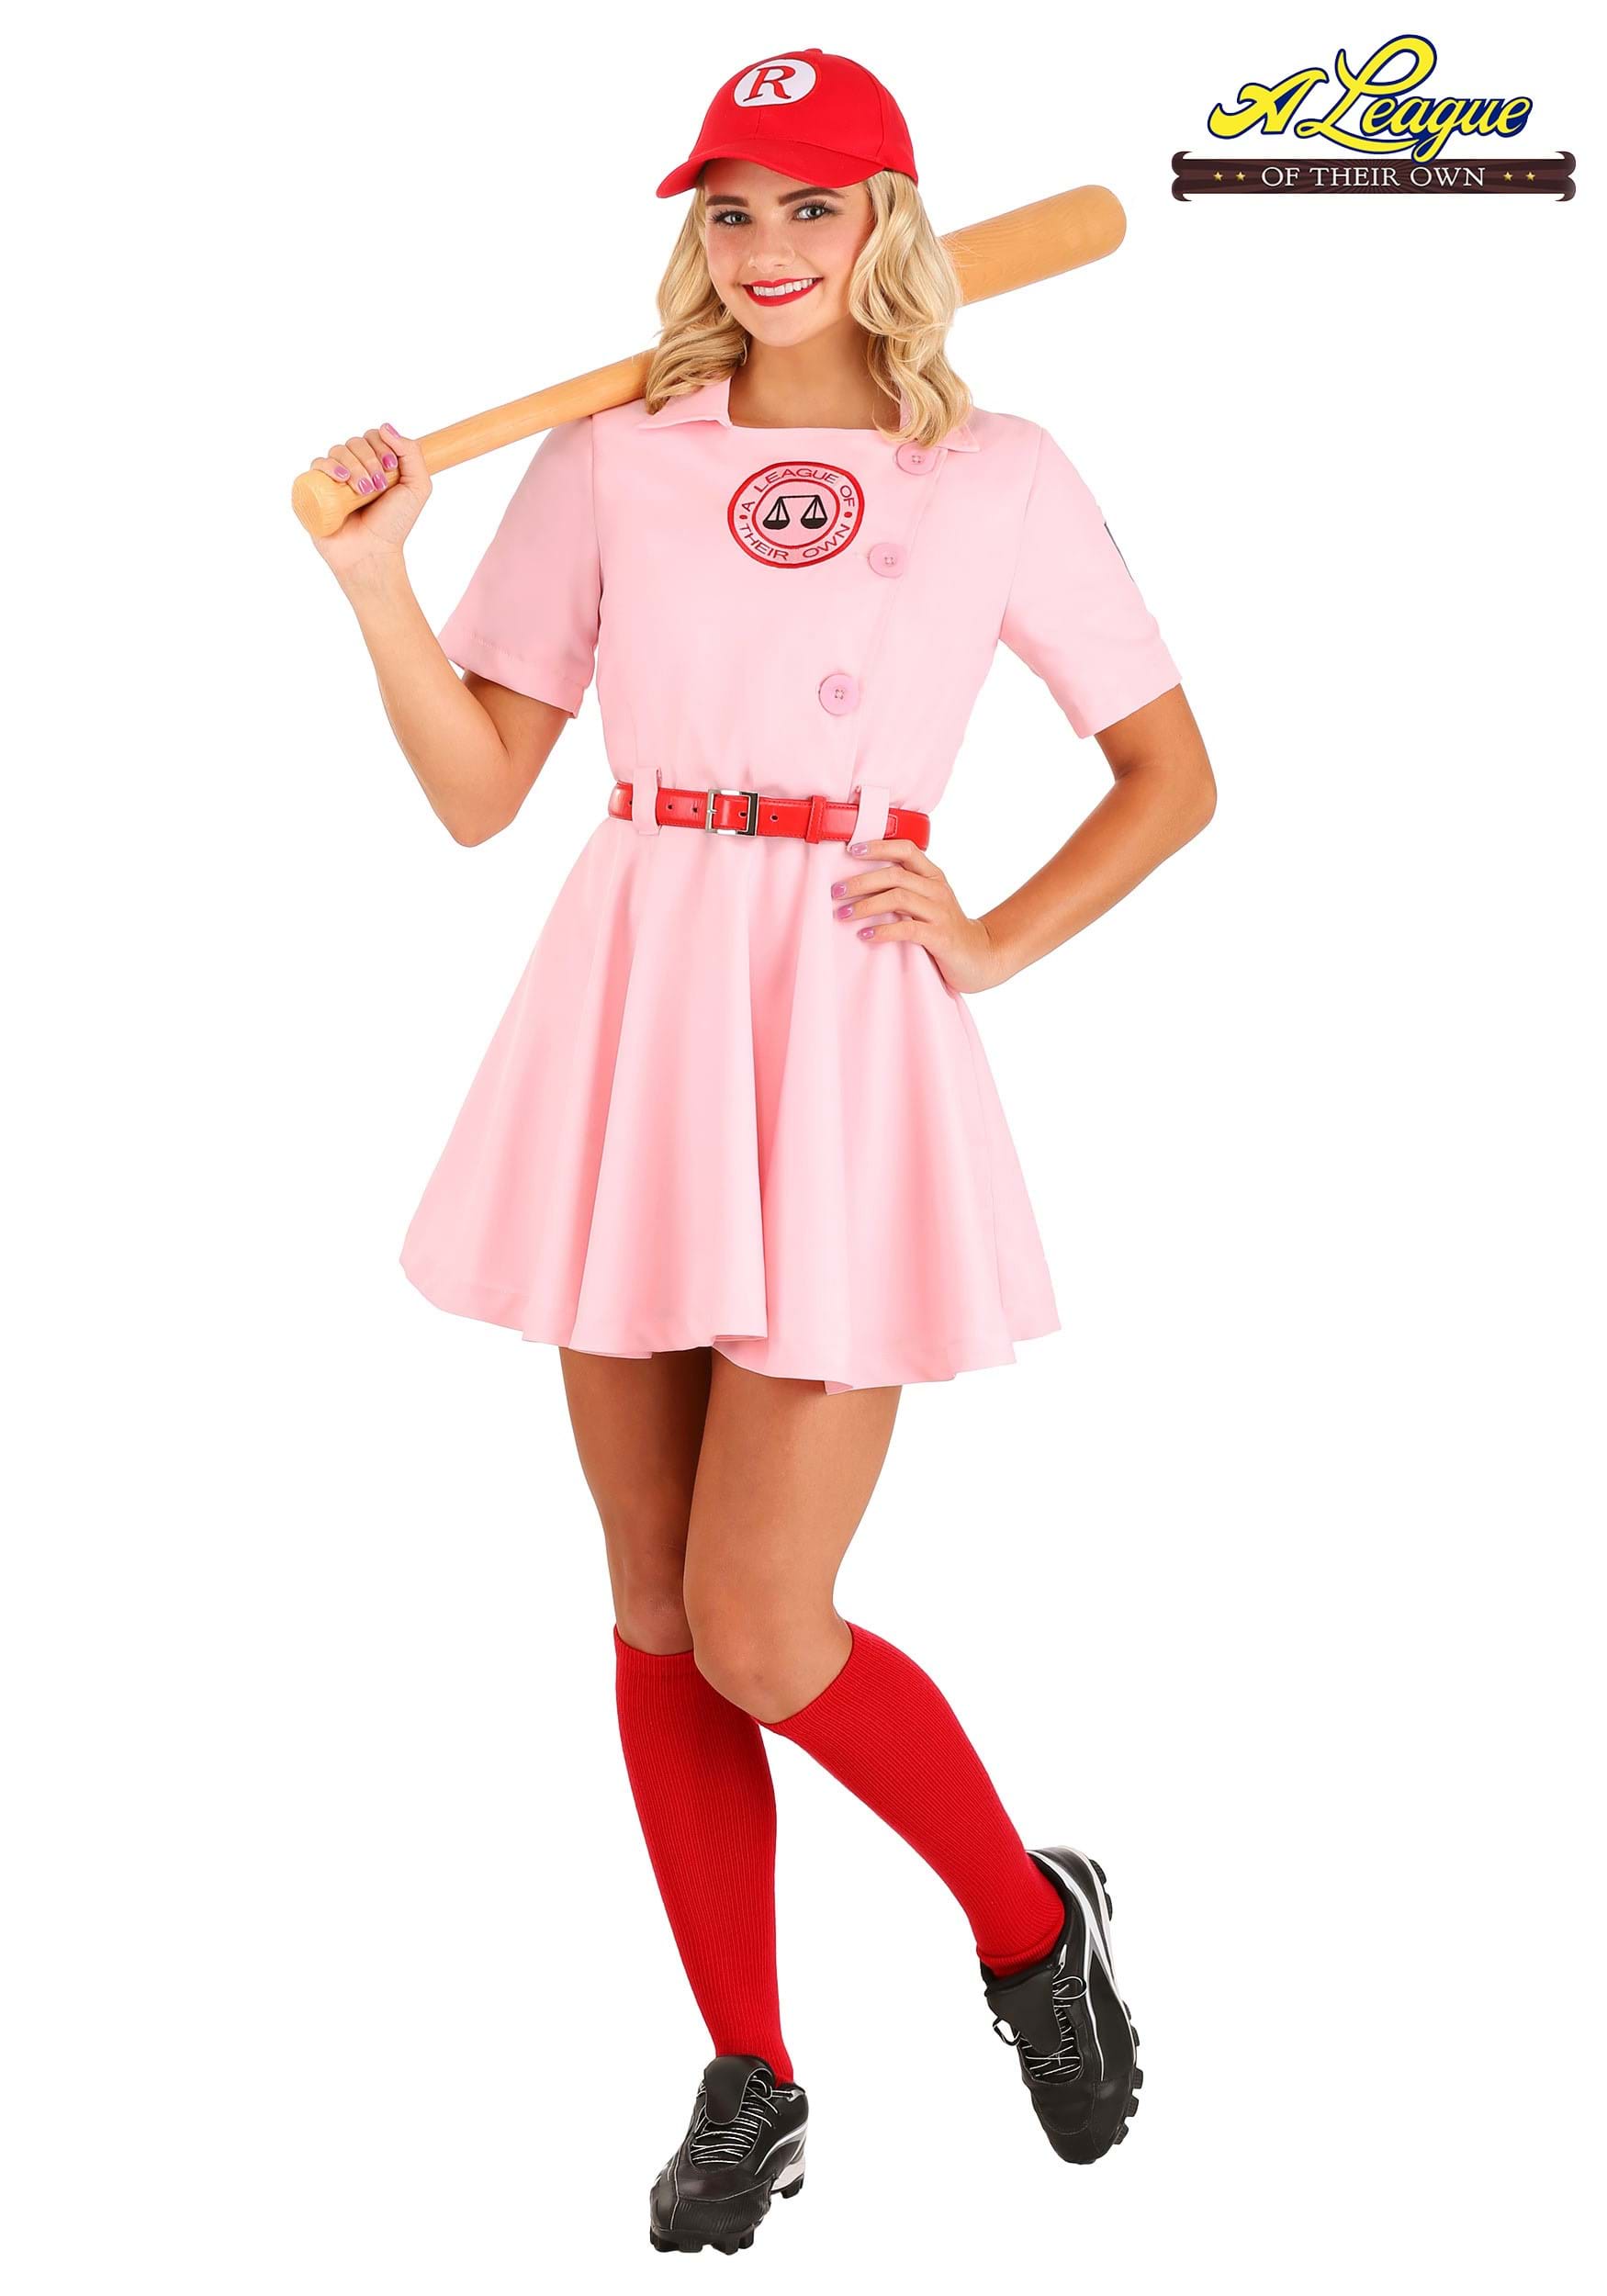 https://images.fun.com/products/57828/1-1/league-of-their-own-luxury-dottie-costume-for-adults-update.jpg